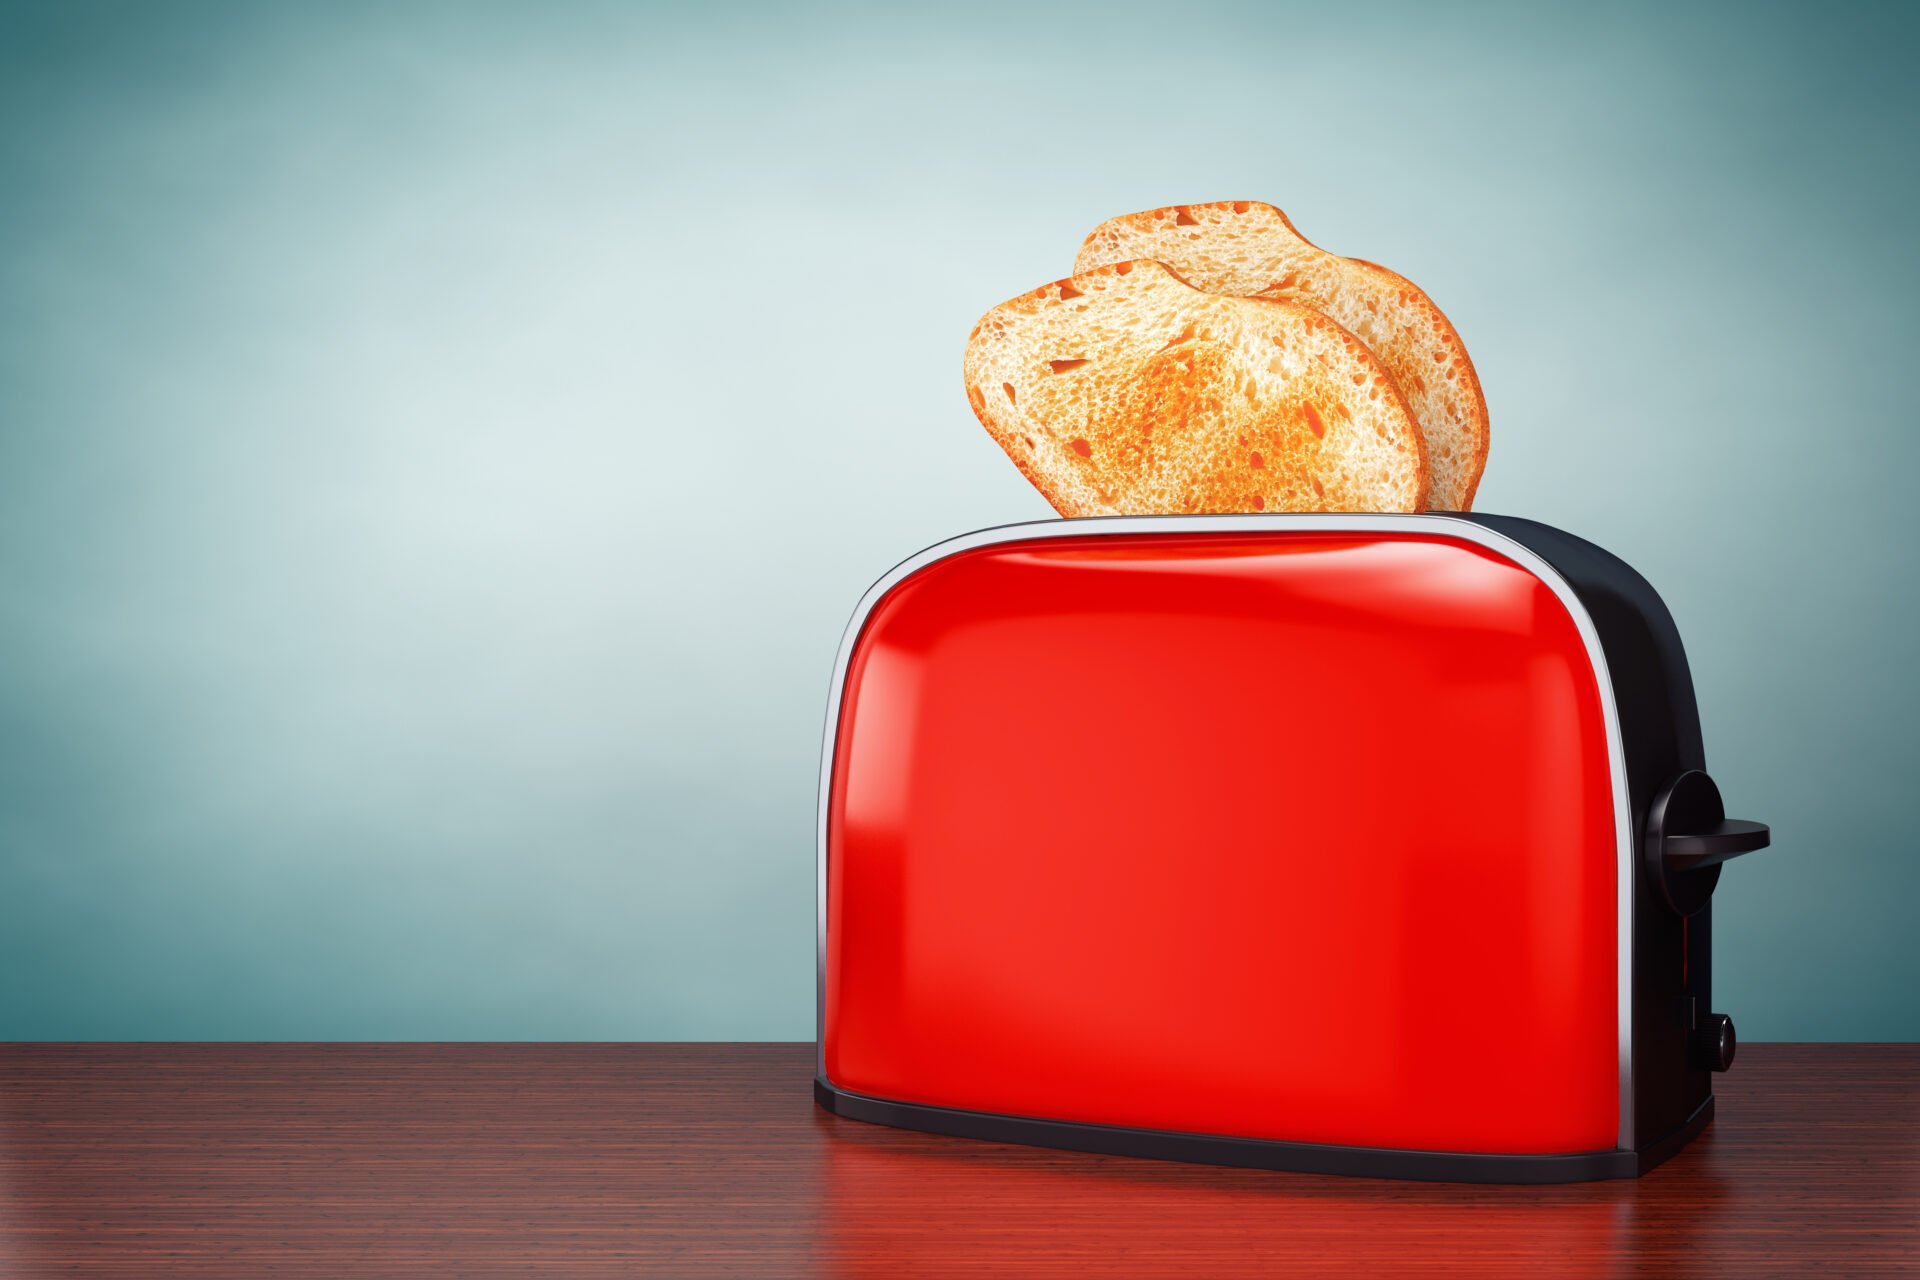 Red toaster oven with toast popping out